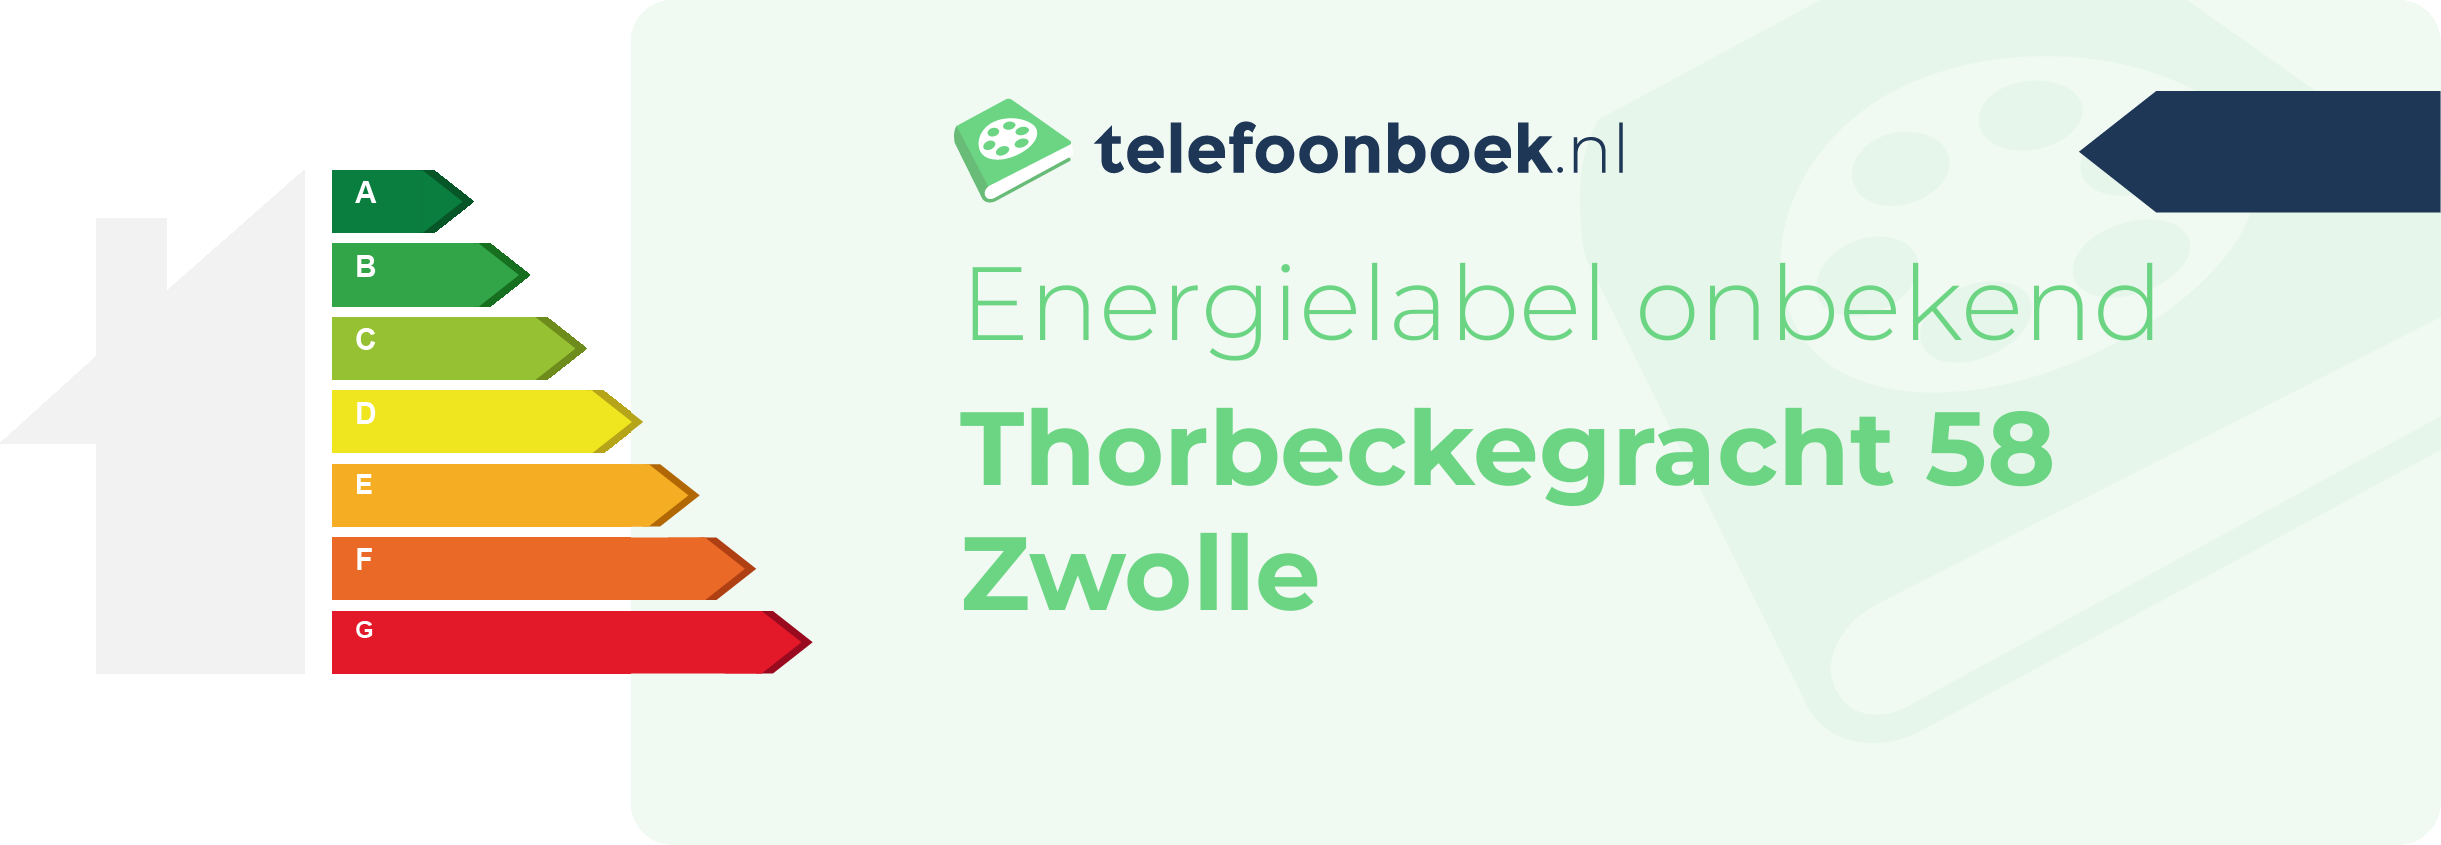 Energielabel Thorbeckegracht 58 Zwolle